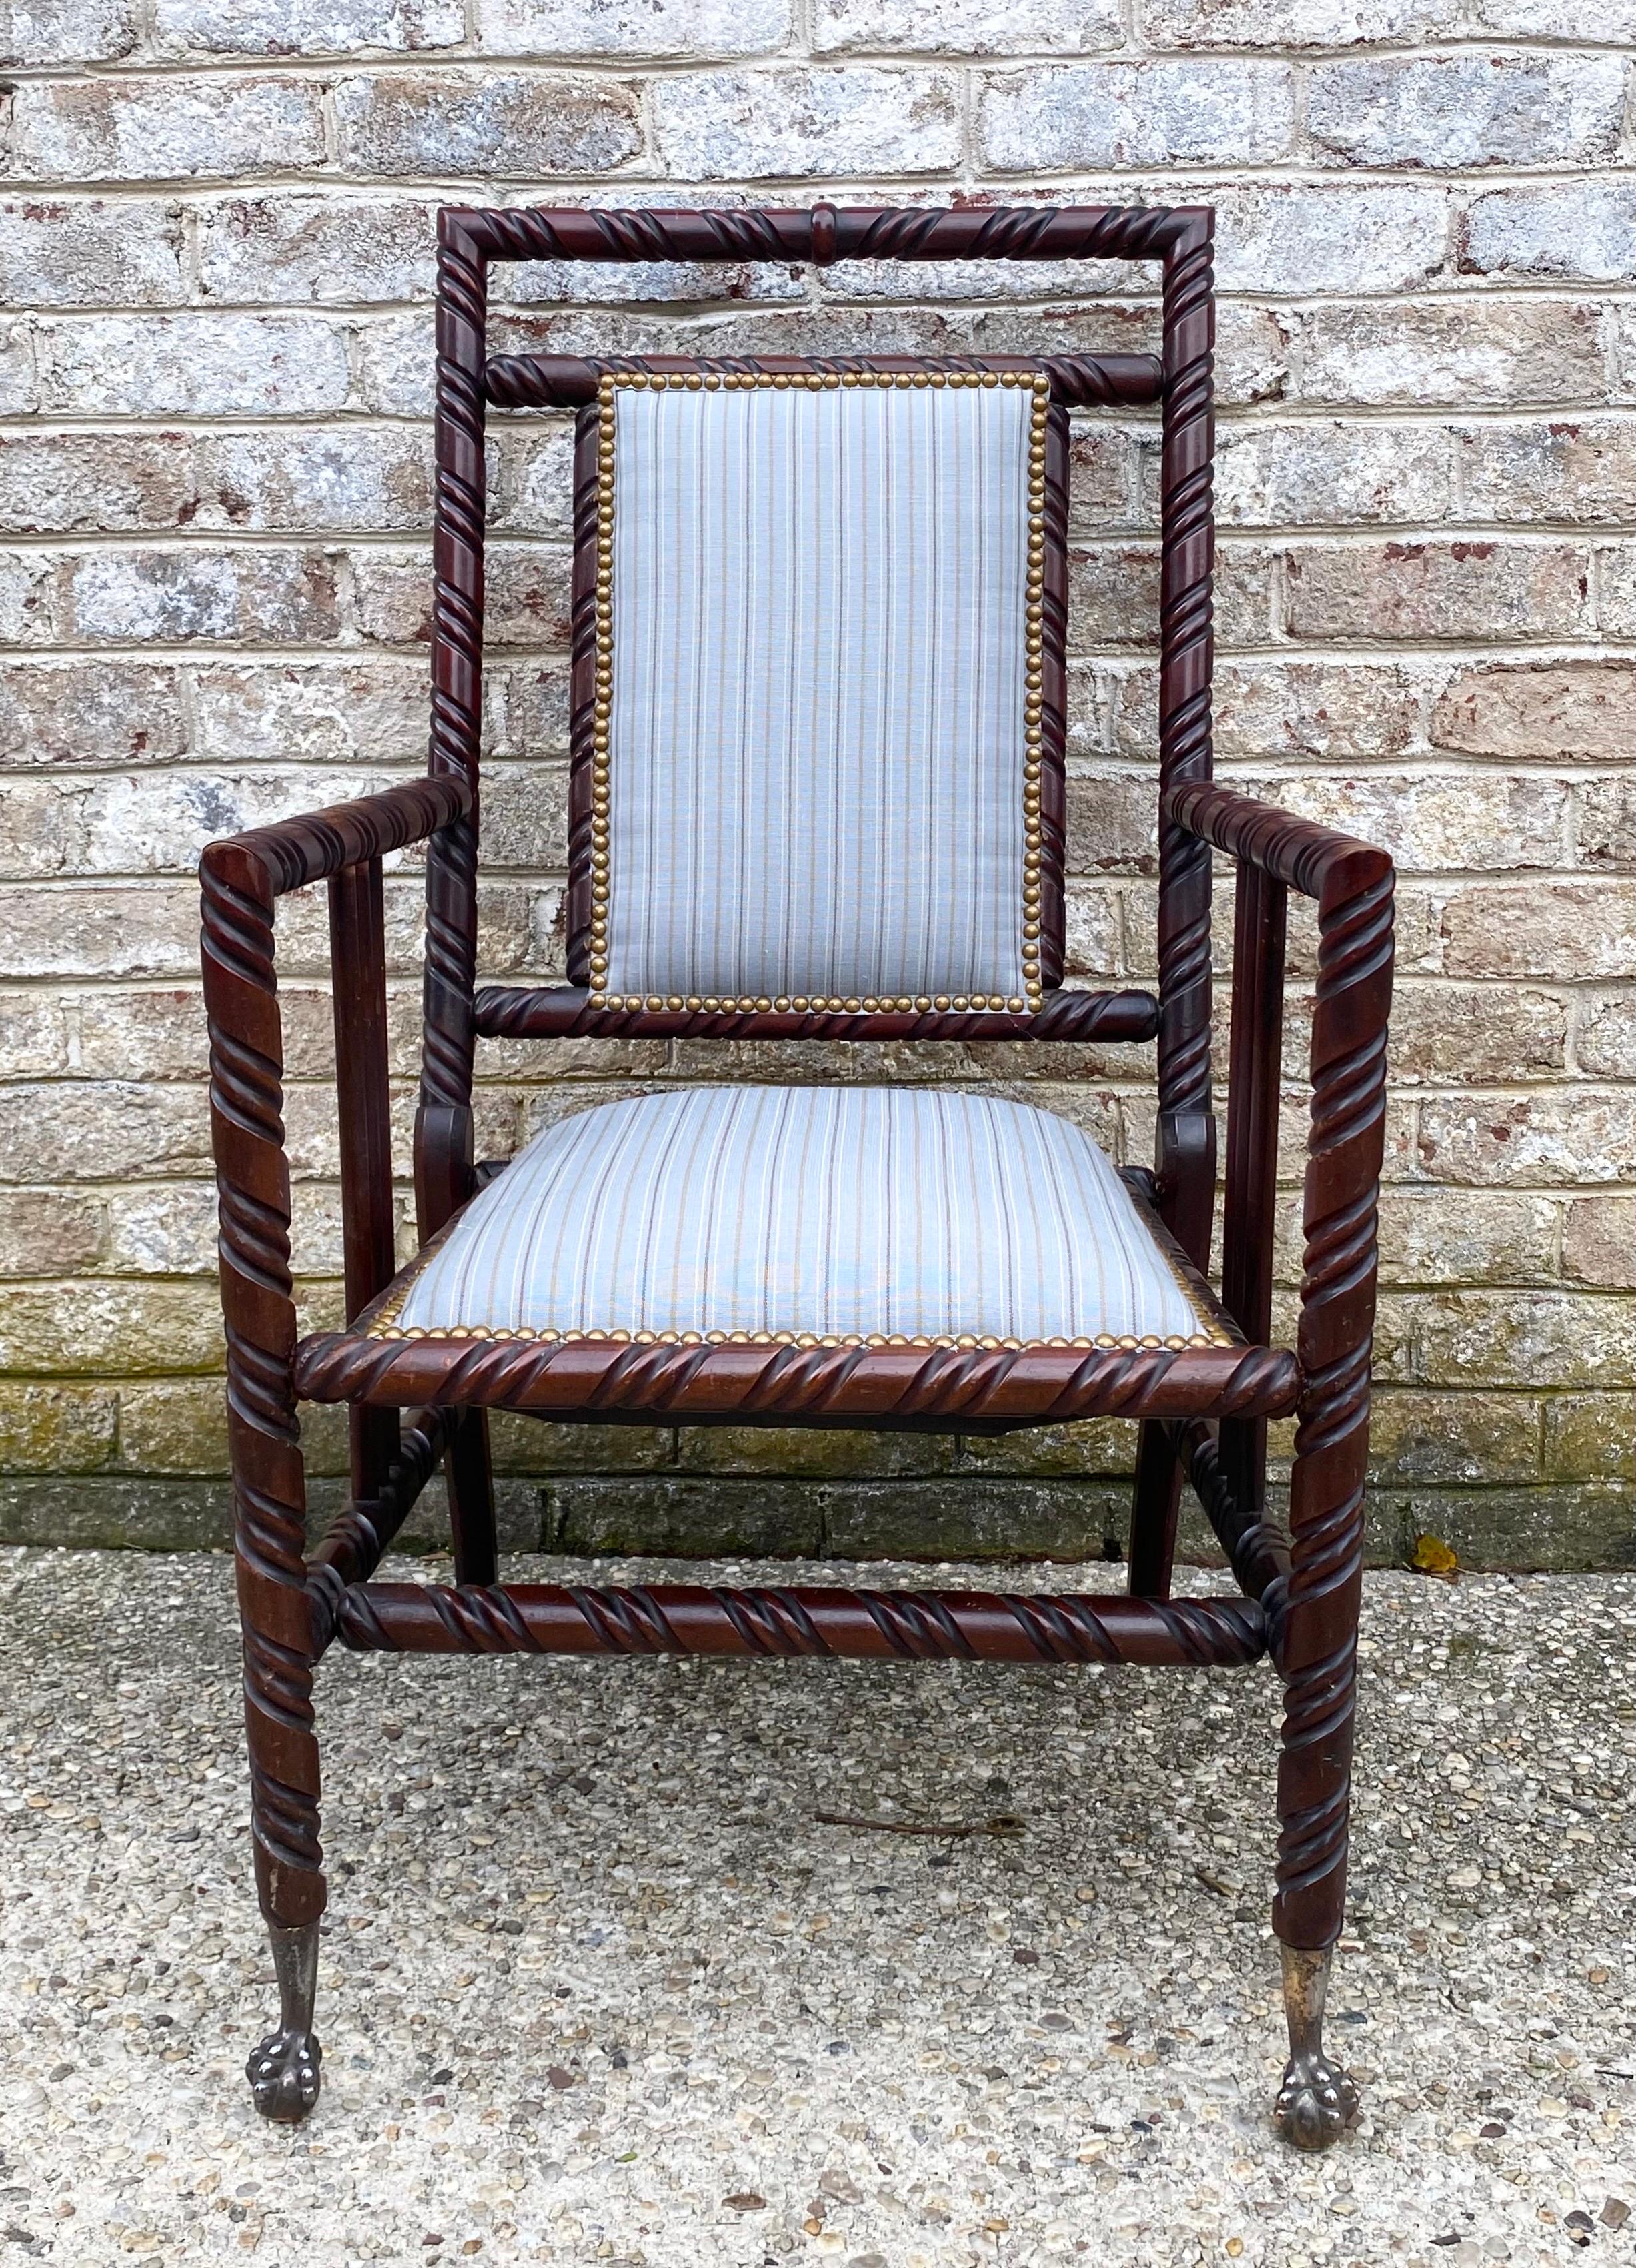 Victorian Hunzinger arm chair with new upholstery and nail heads..... front feet detail is exquisite.